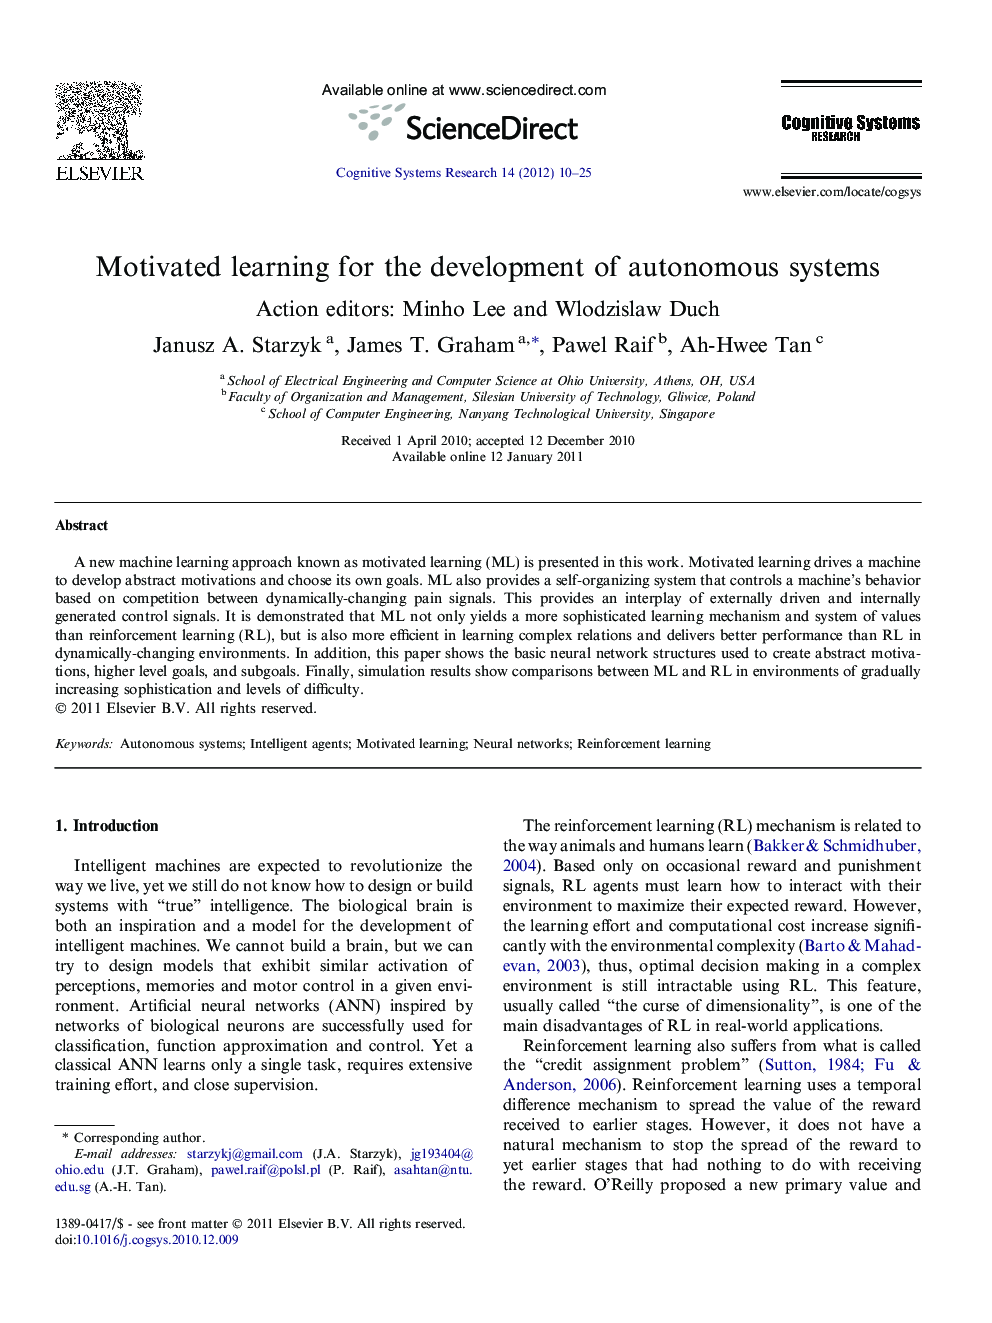 Motivated learning for the development of autonomous systems